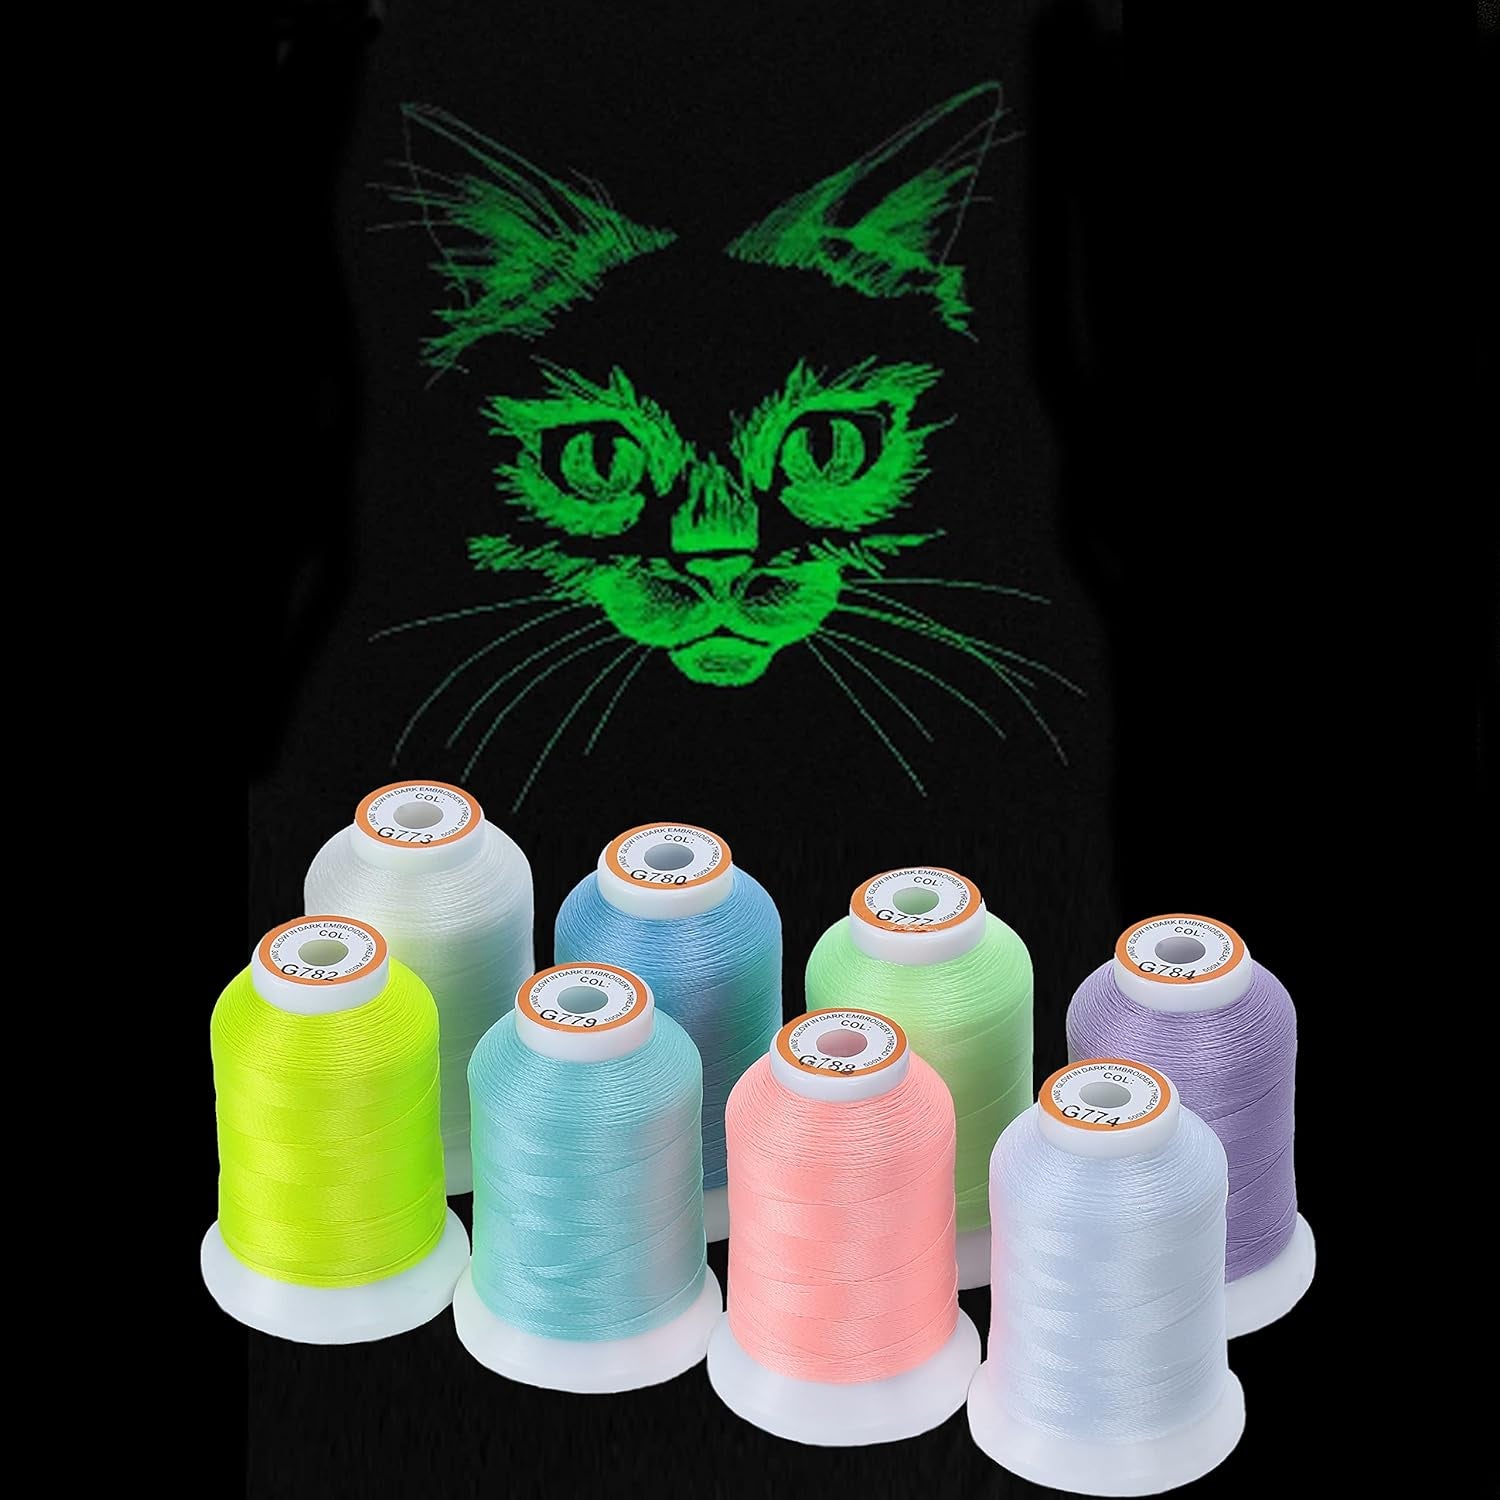 8 Colors Luminary Glow in the Dark Embroidery Machine Thread Kit 30WT 500M(550Y) Each Spool for Embroidery, Quilting, Sewing